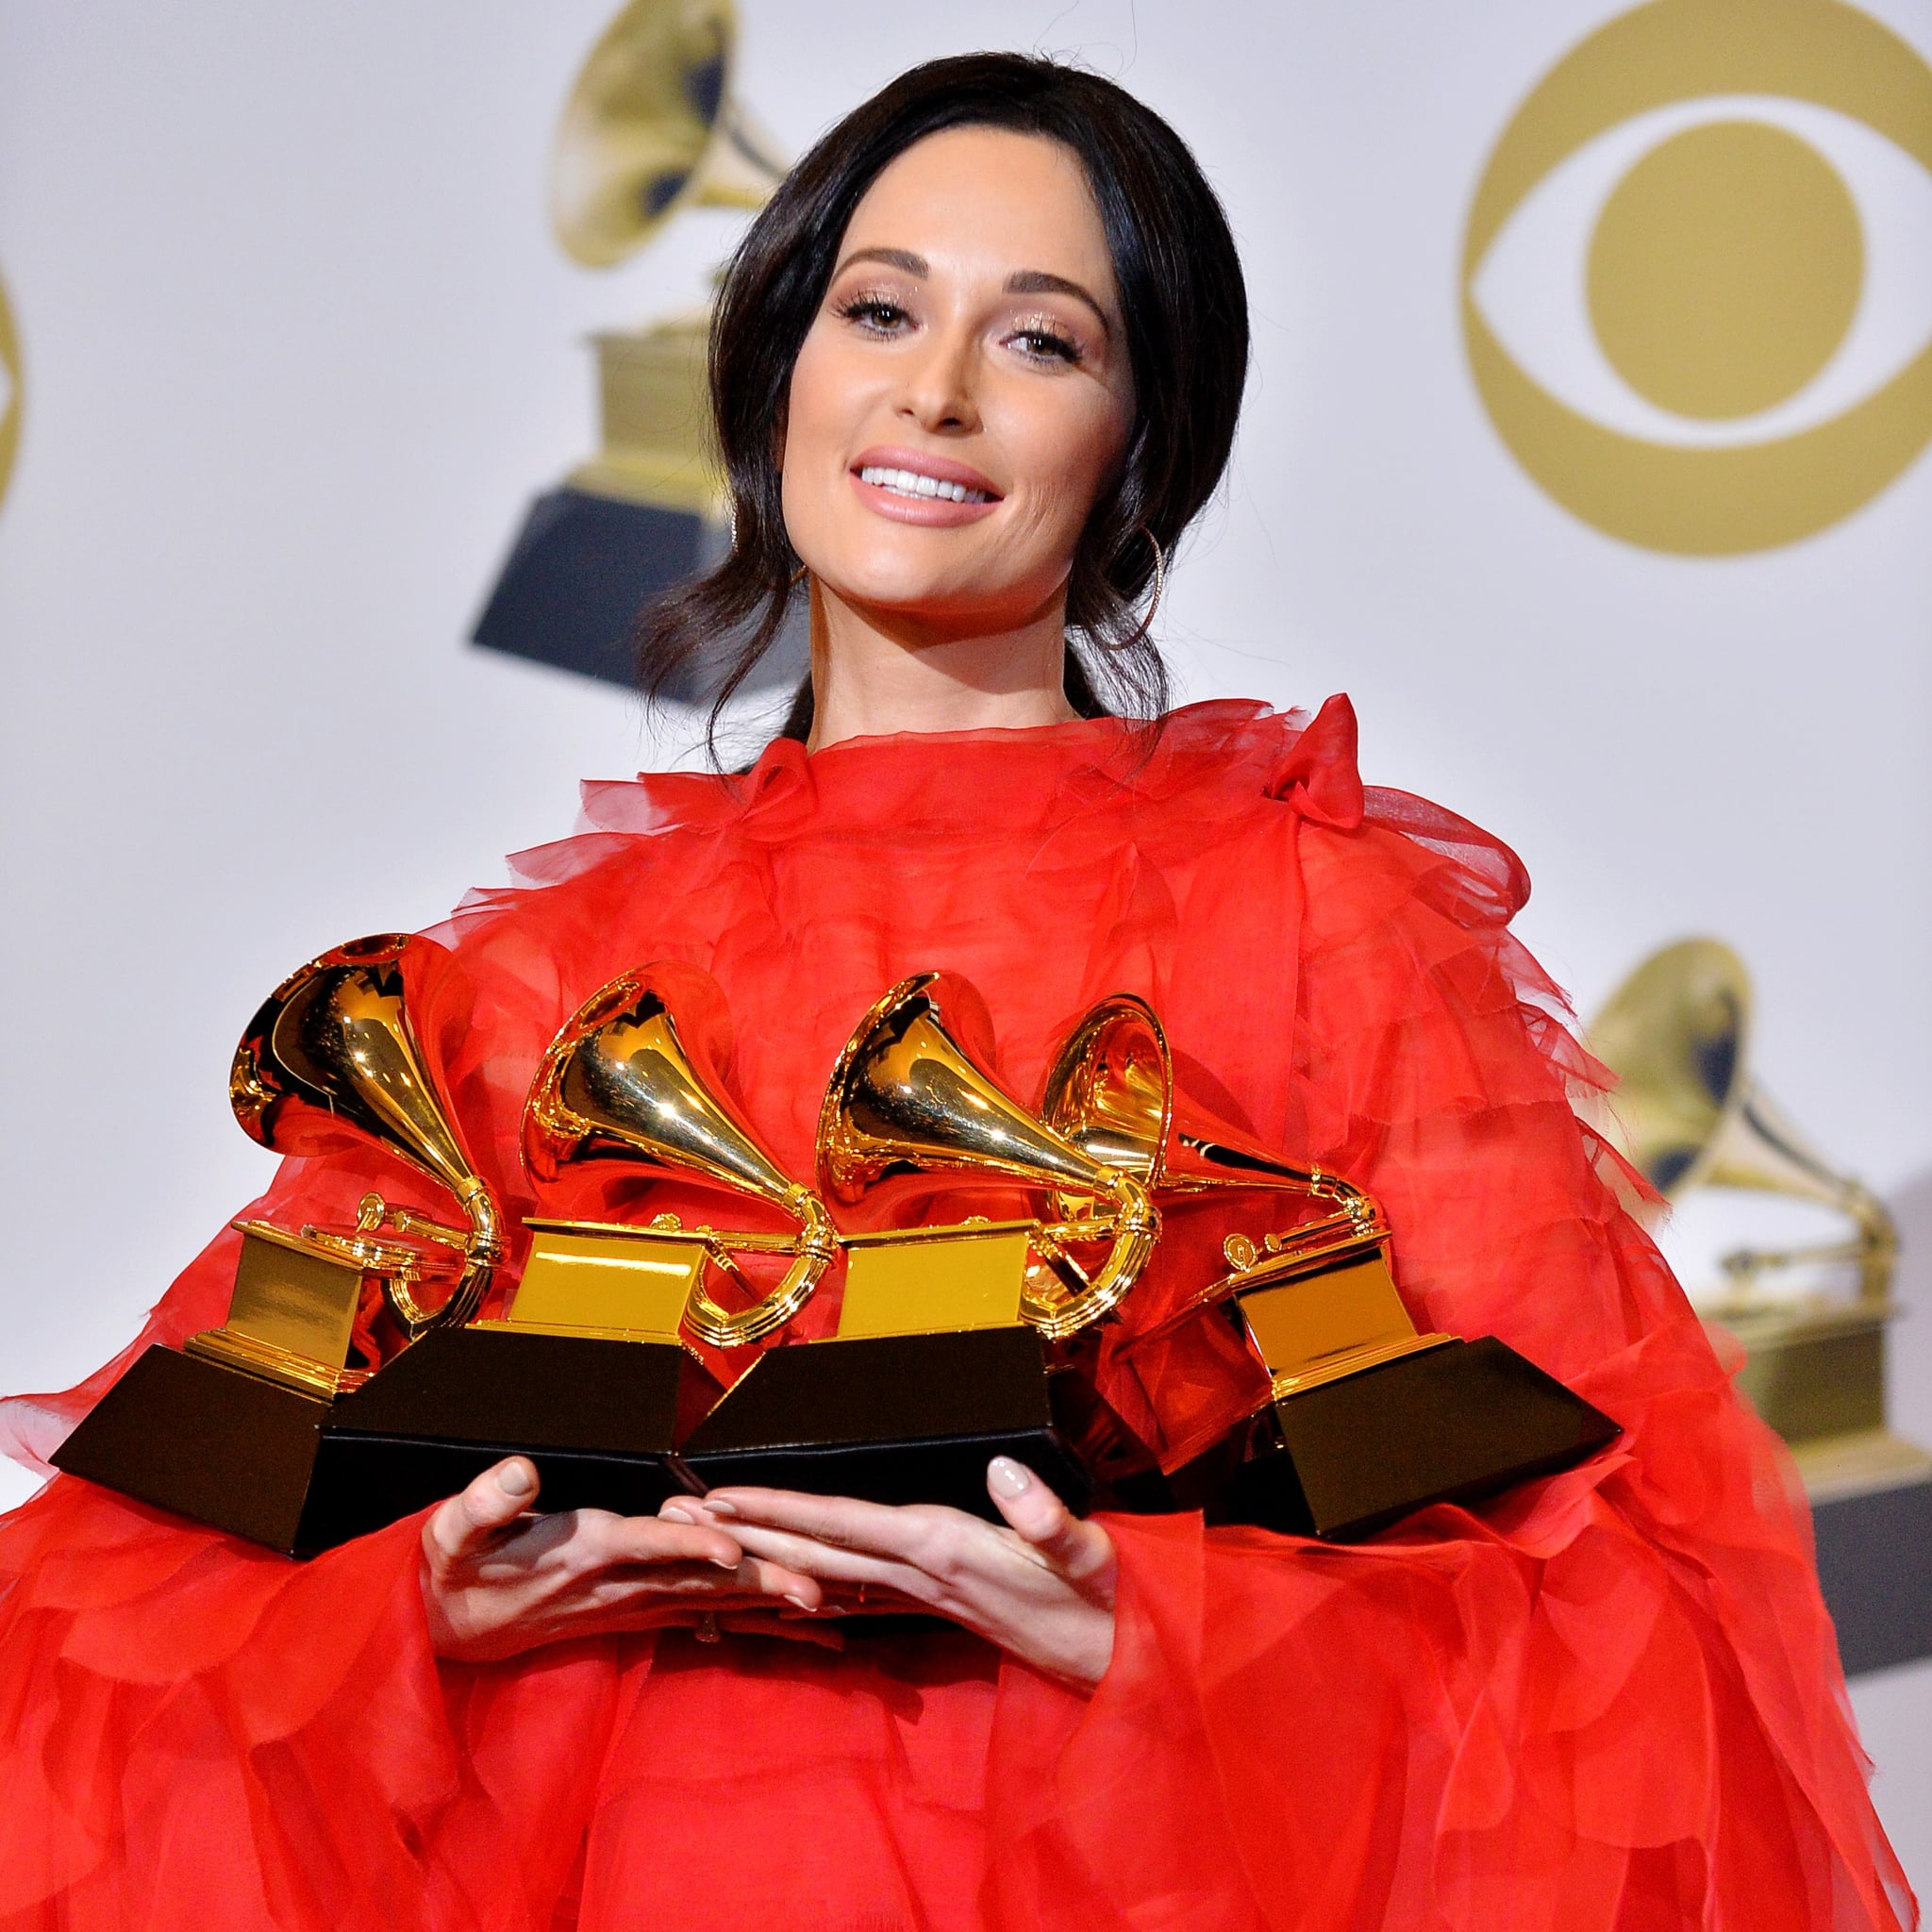 Kacey Musgraves Wins Album Of The Year At The 2019 Grammys